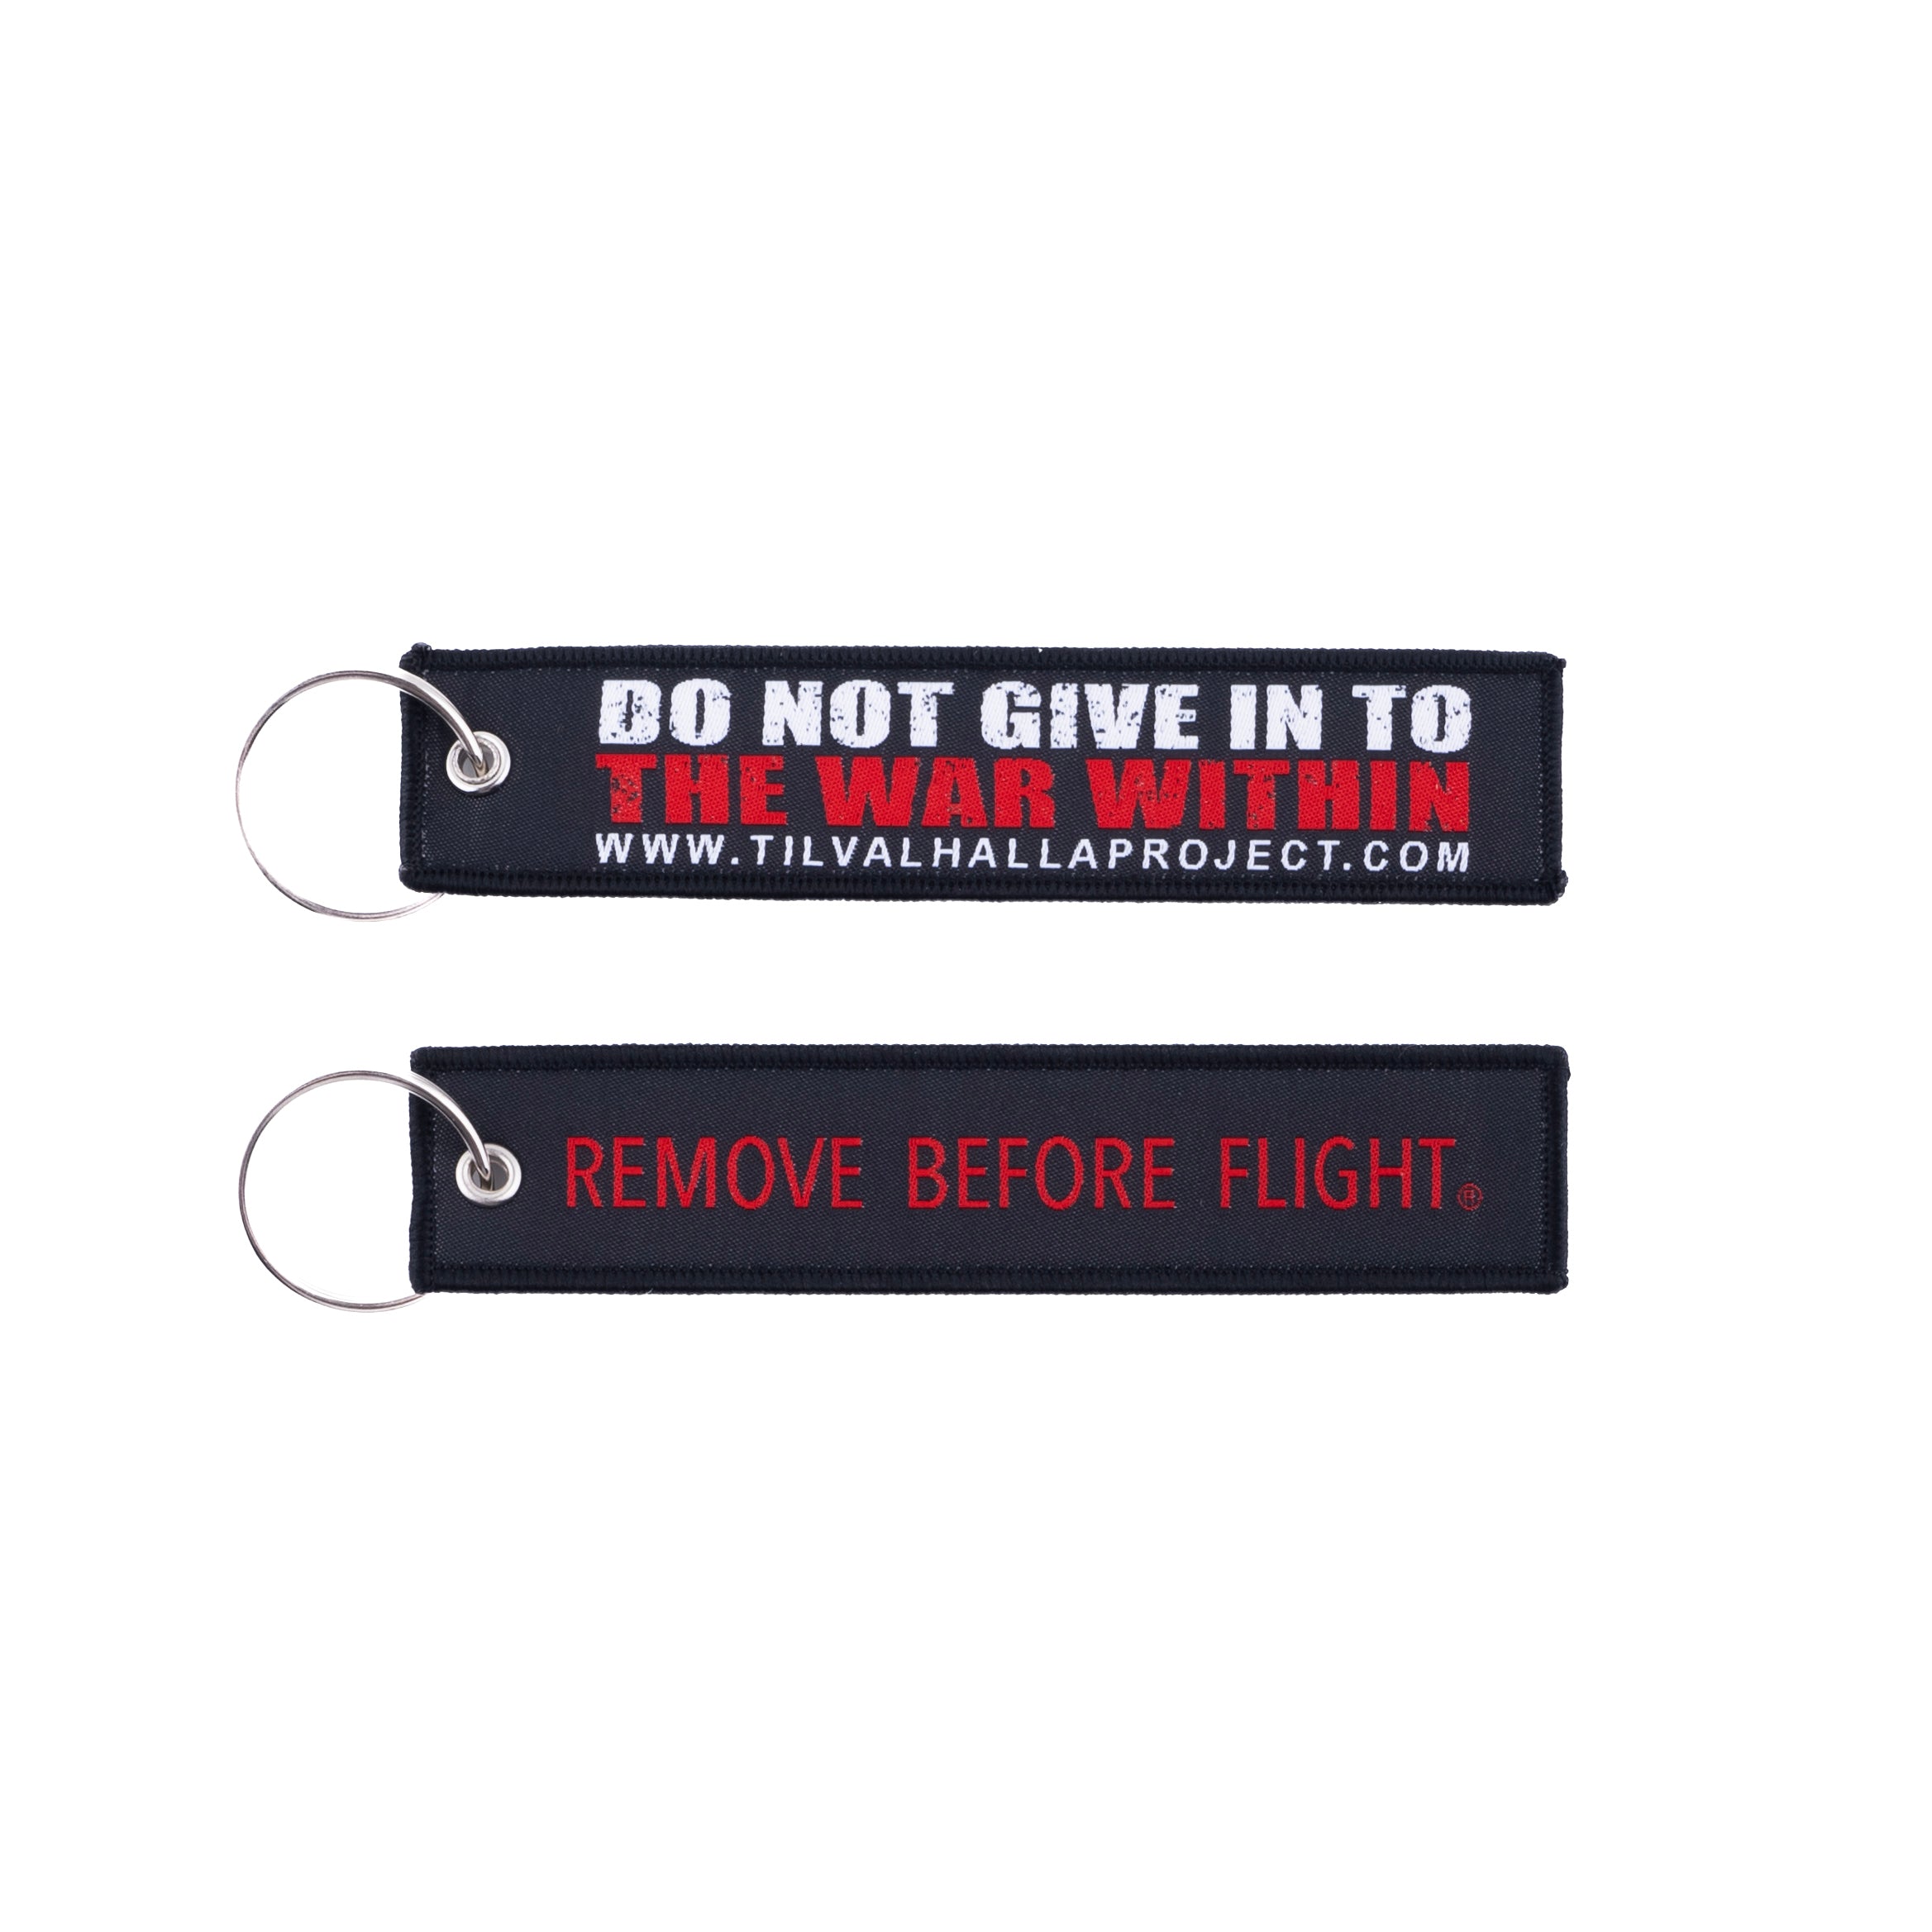 History behind the Remove Before Flight Phrase 